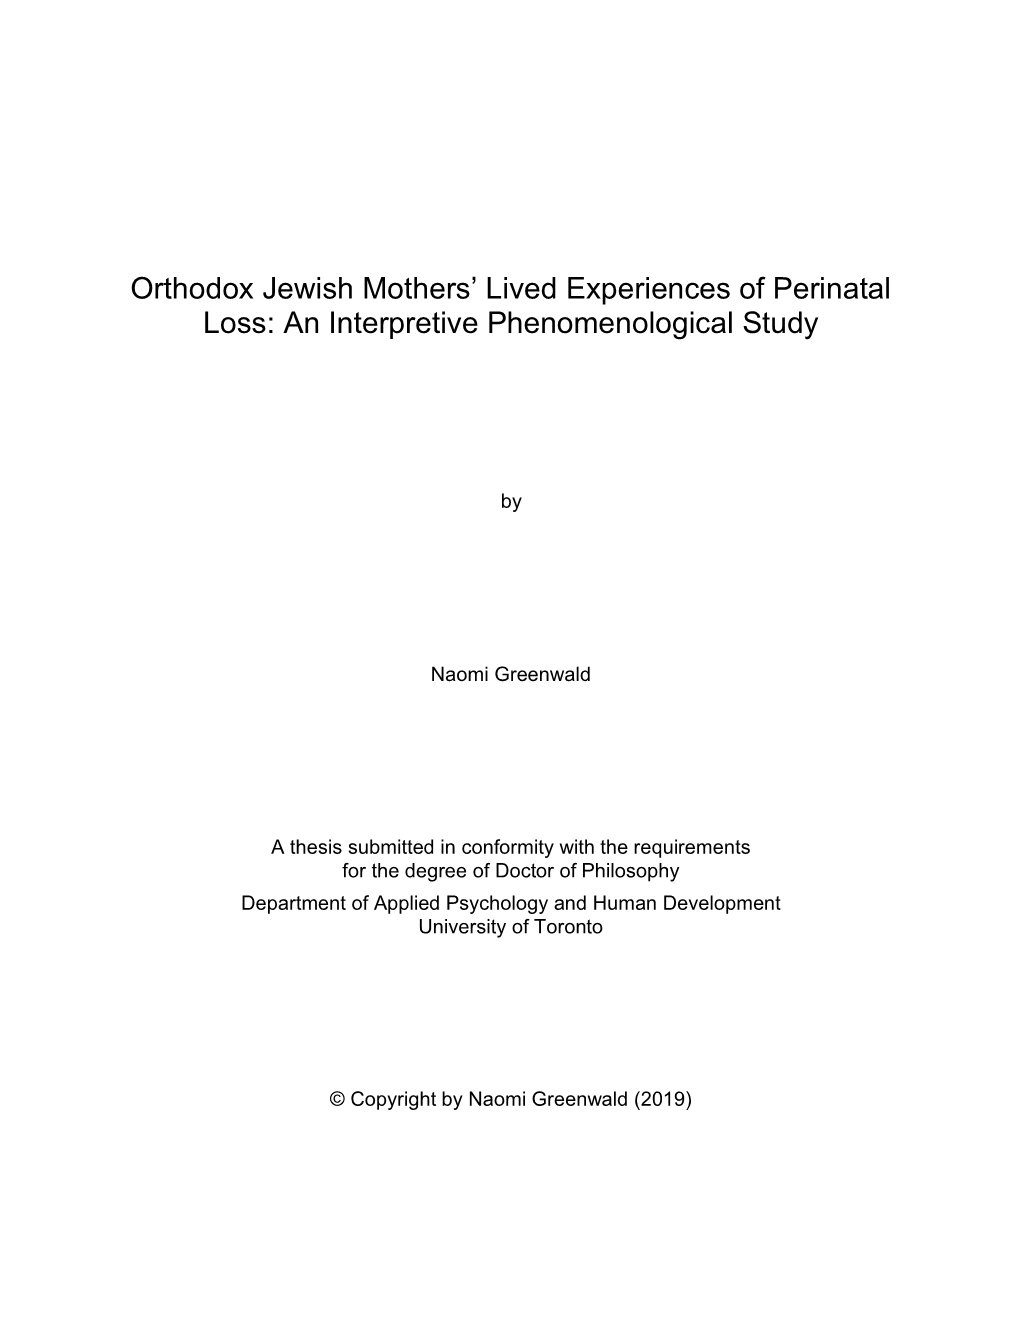 Orthodox Jewish Mothers' Lived Experiences of Perinatal Loss: an Interpretive Phenomenological Study